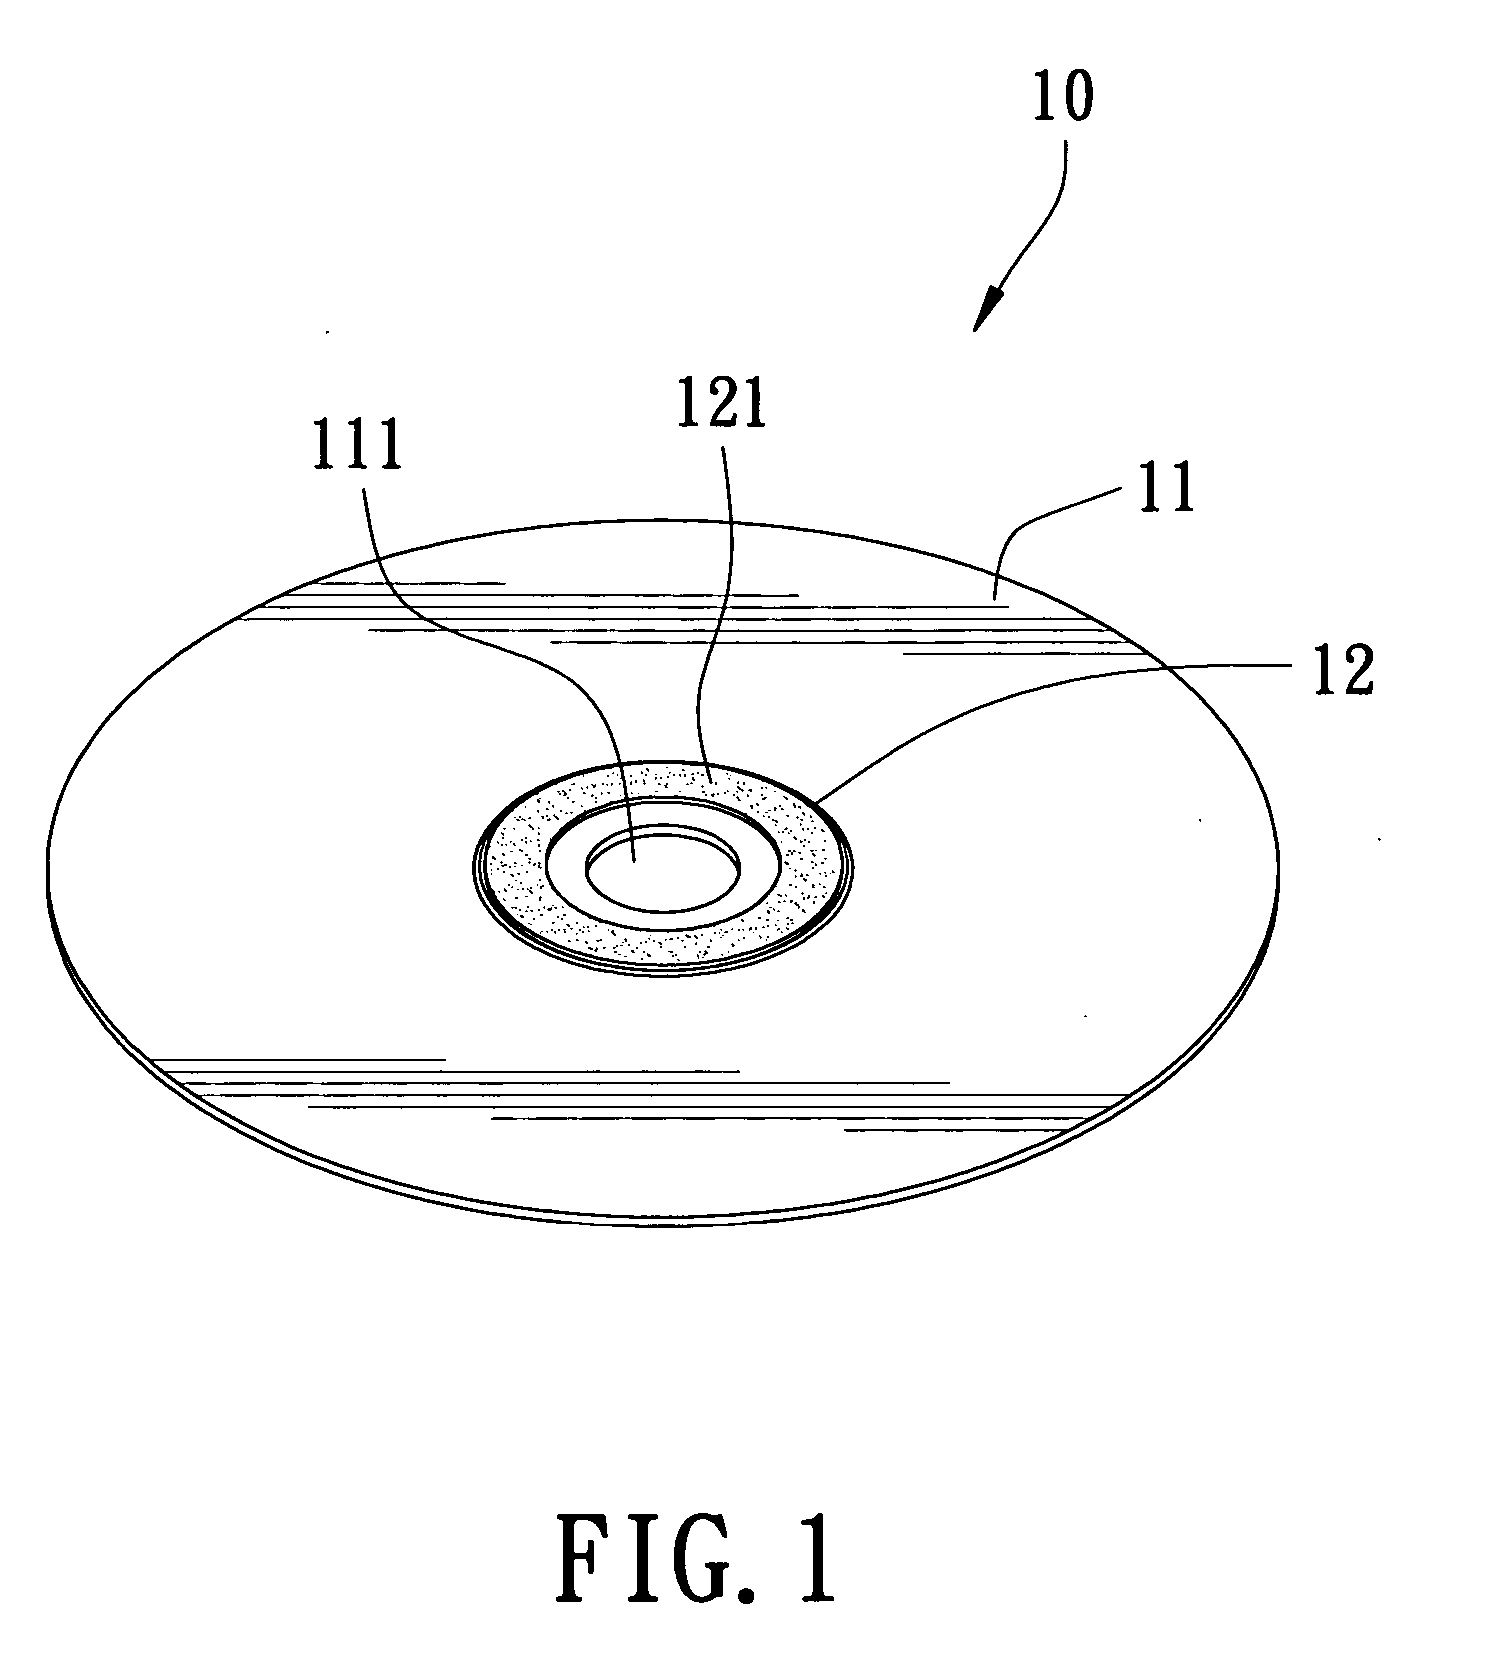 Cleaning device for the main shaft CD carrying tray of a CD player